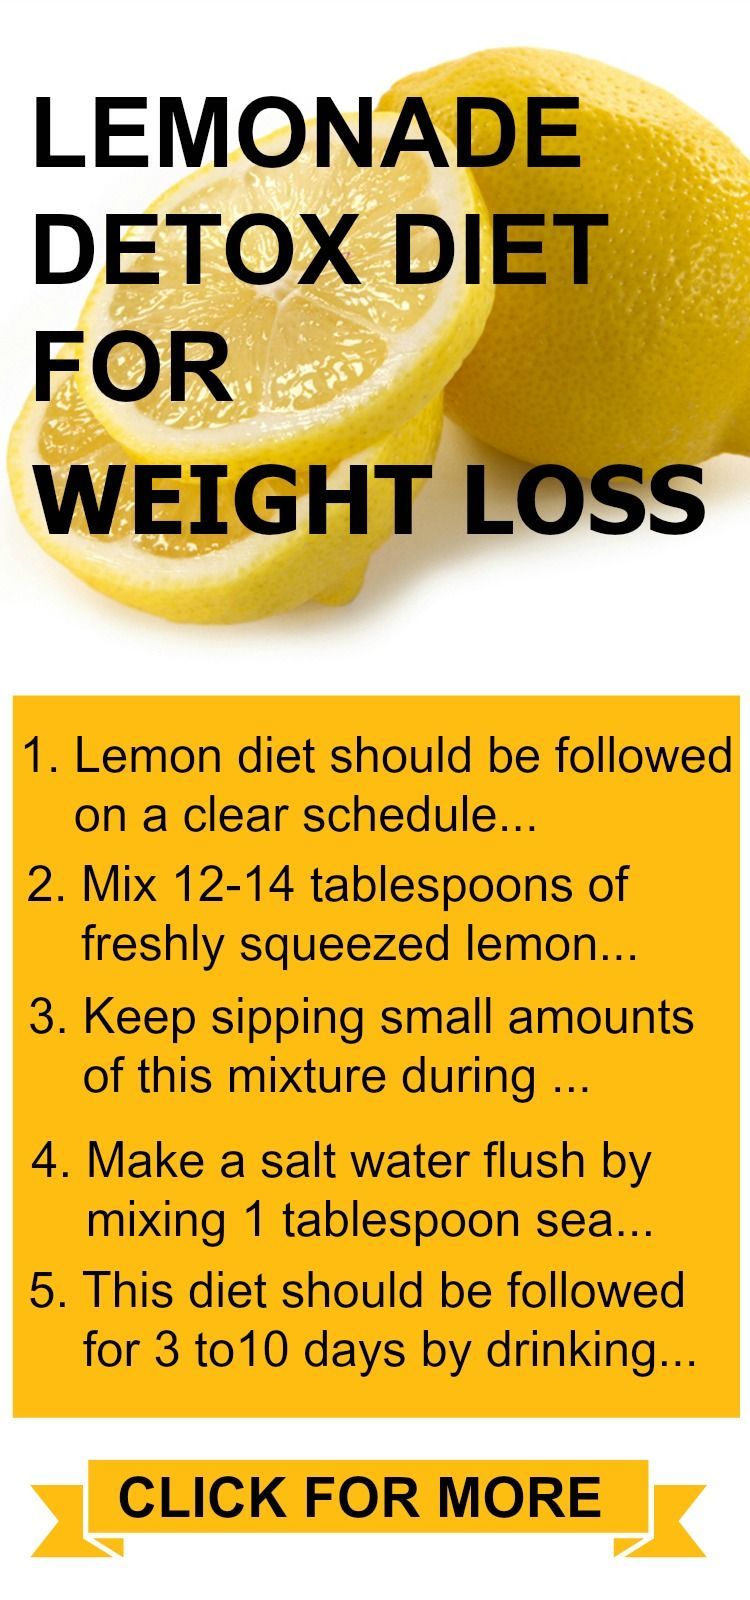 The Lemonade Diet, also known as the master cleanse, is a diet resulting in rapid weight loss over a period of several days to